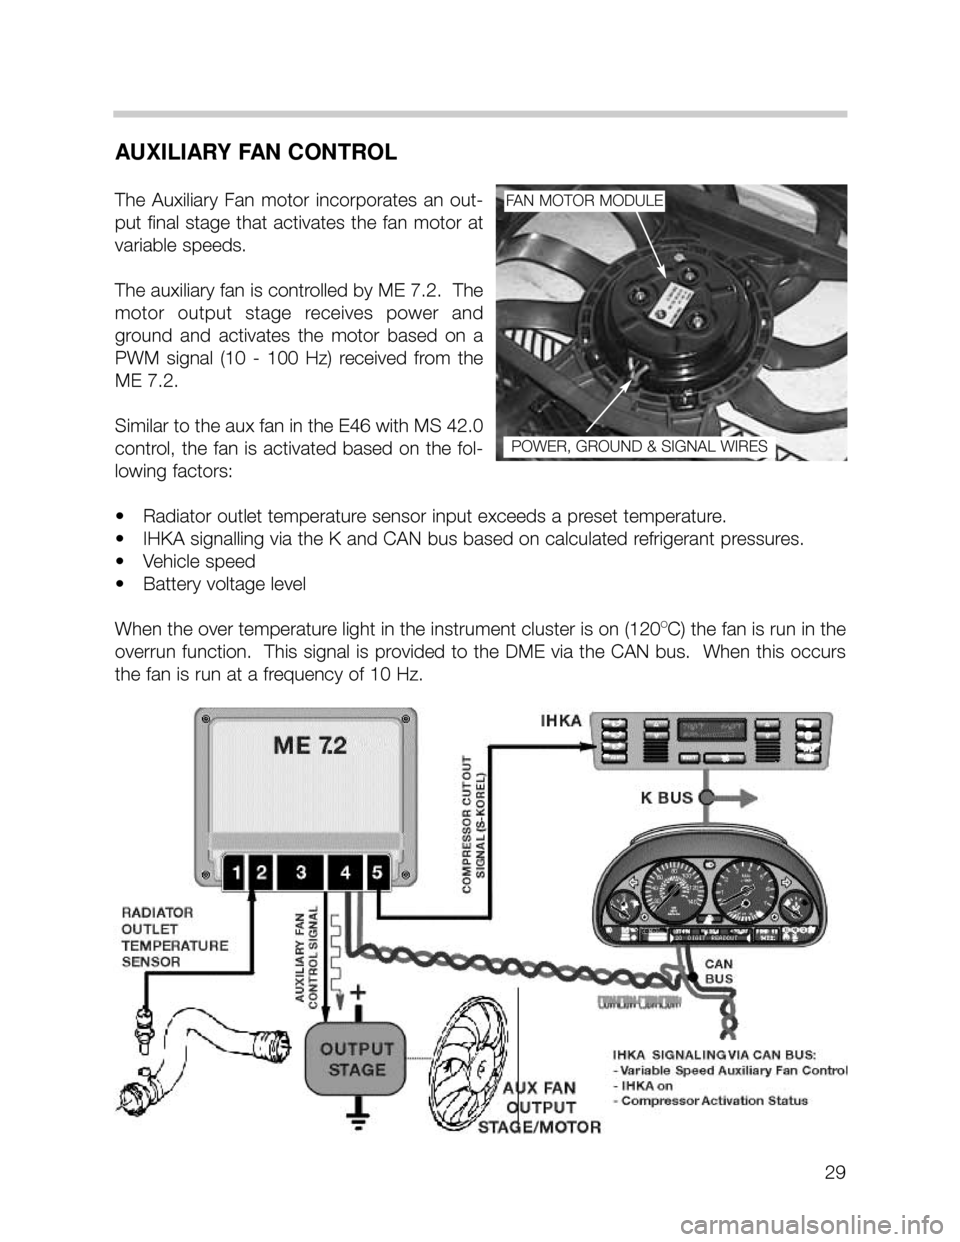 BMW X5 2002 E53 M62TU Engine Workshop Manual 29
AUXILIARY FAN CONTROL
The  Auxiliary  Fan  motor  incorporates  an  out-
put  final  stage  that  activates  the  fan  motor  at
variable speeds.  
The auxiliary fan is controlled by ME 7.2.  The
m